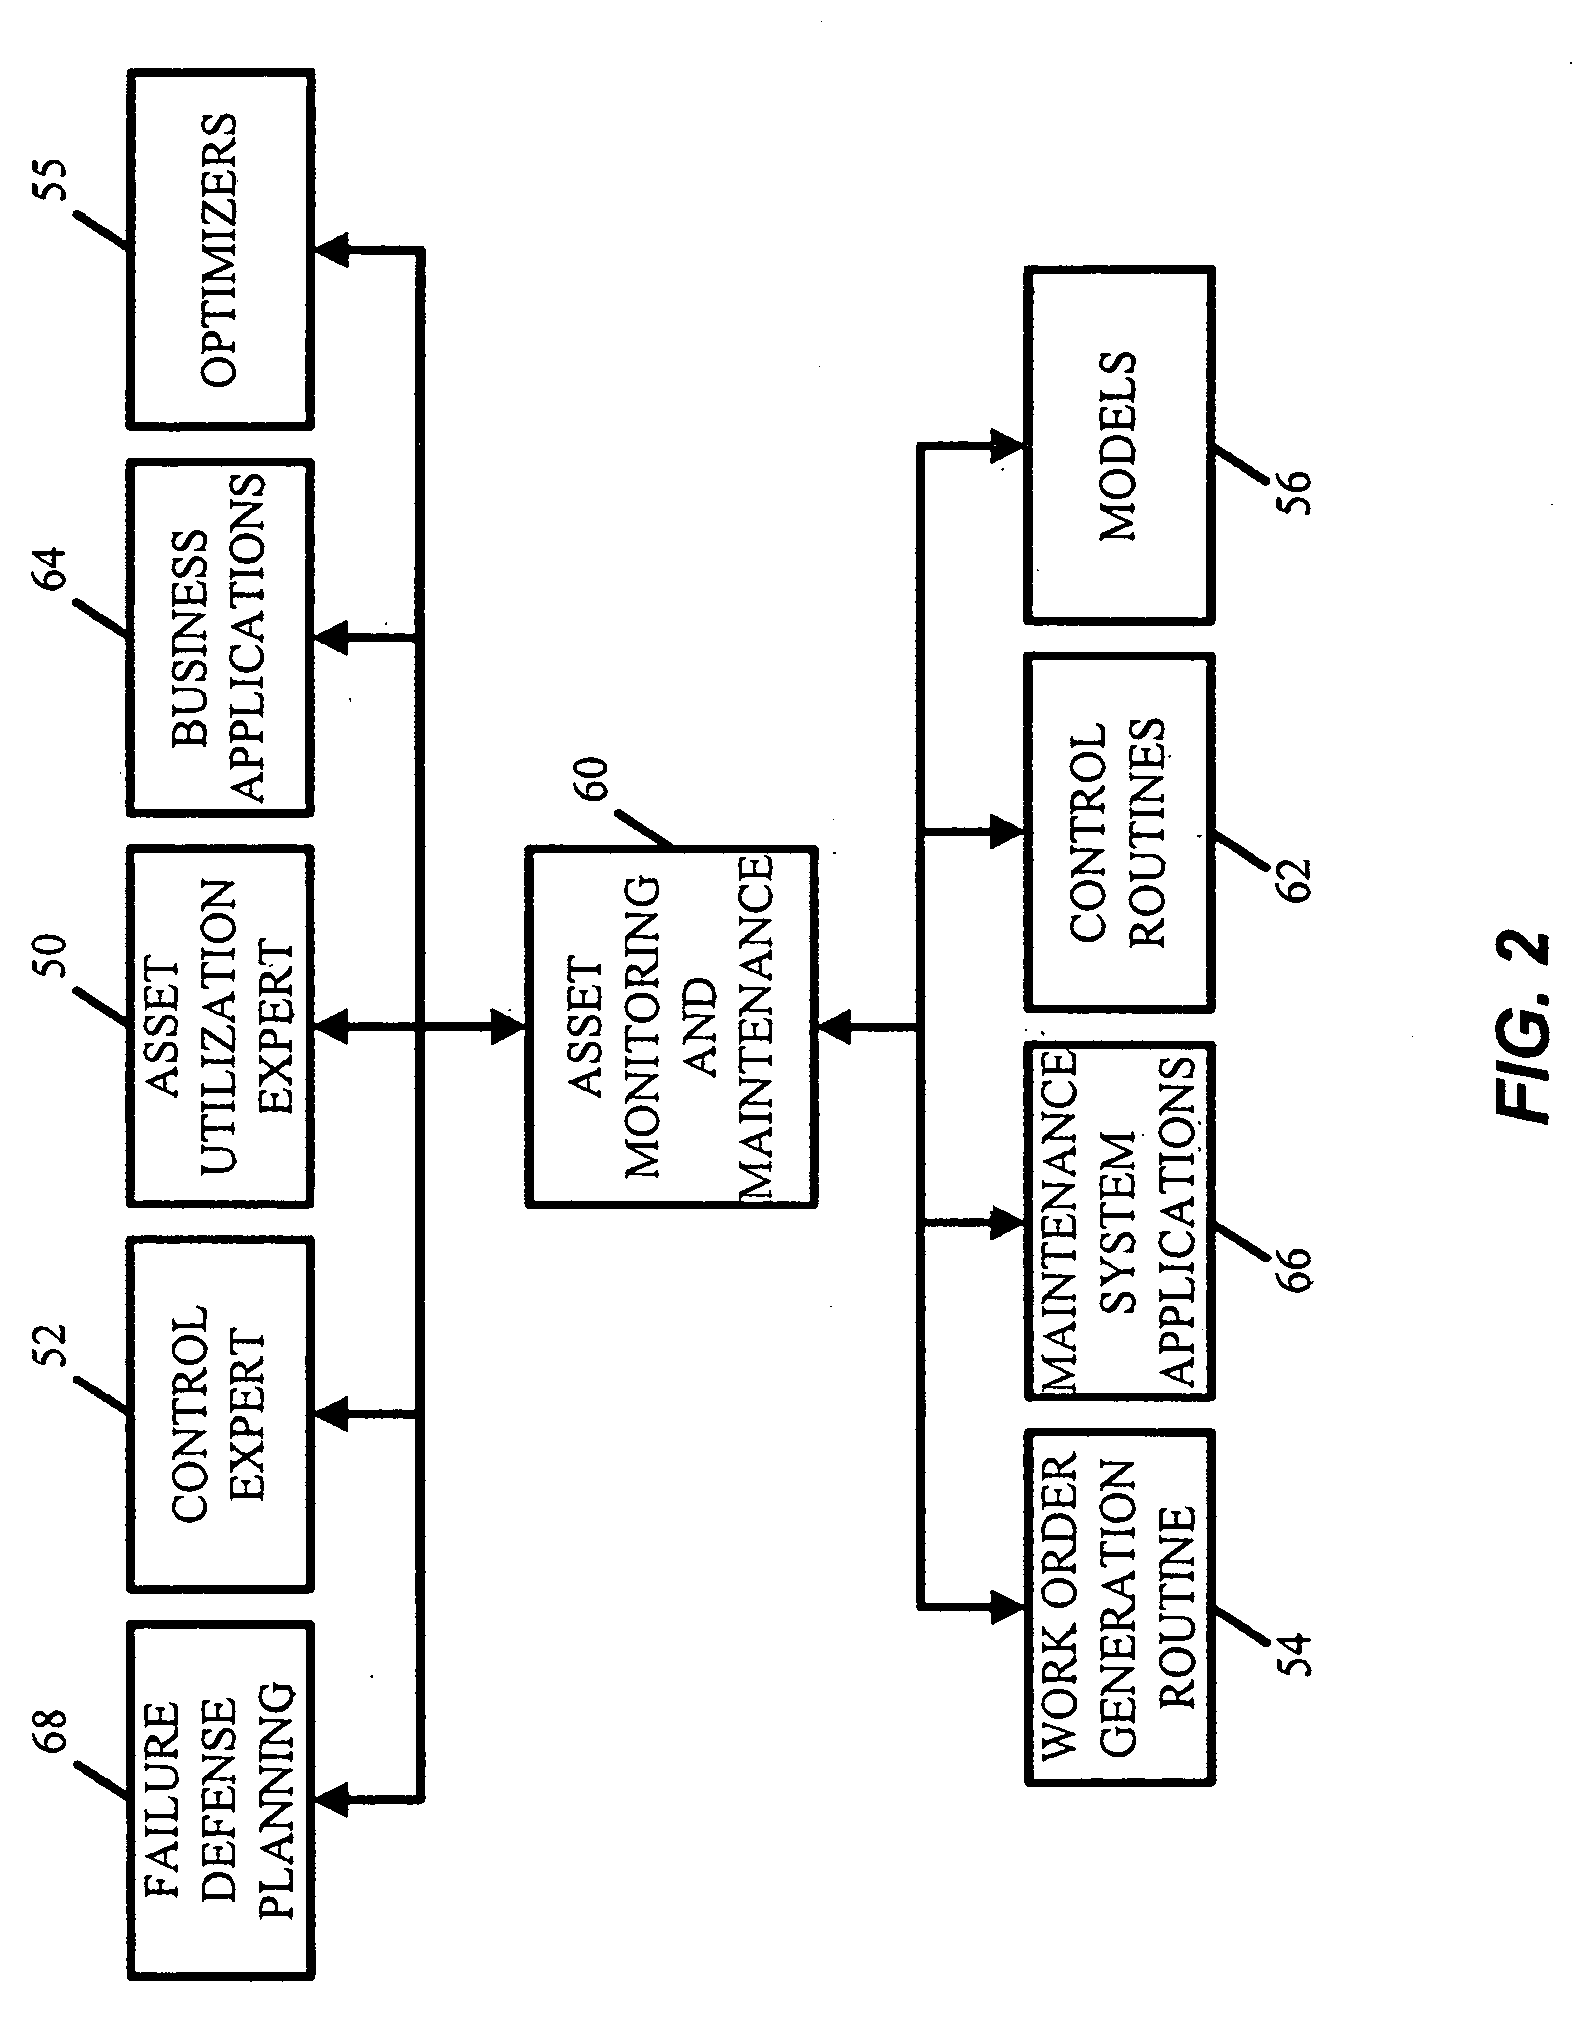 Method and apparatus for performing a function in a process plant using monitoring data with criticality evaluation data